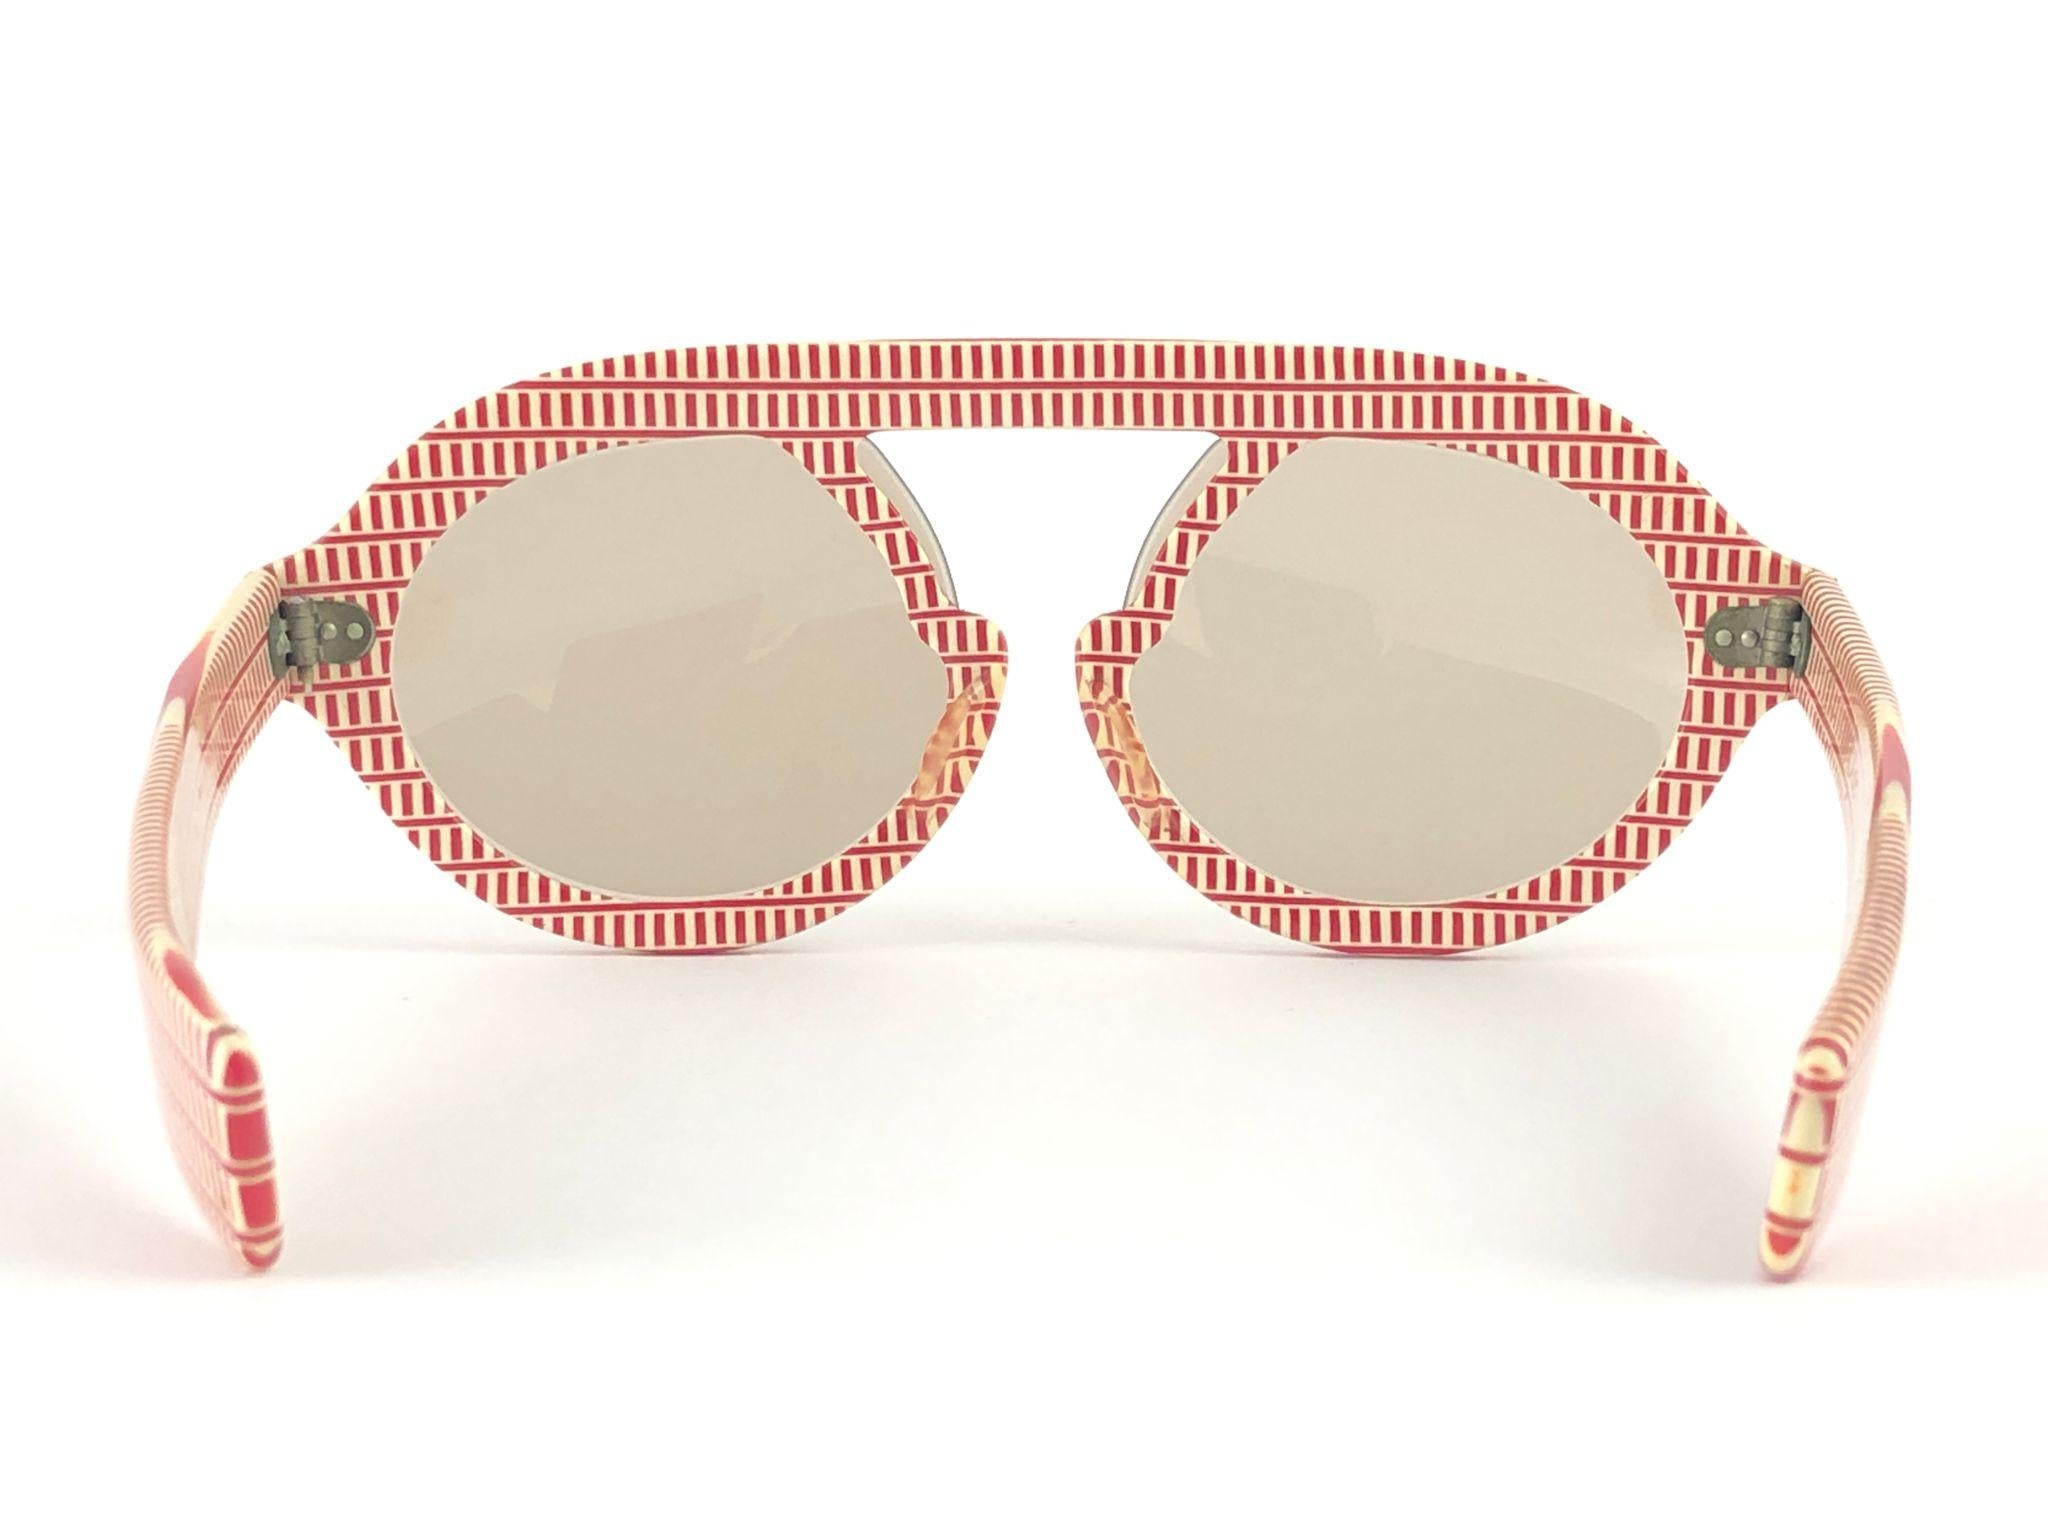 Ultra Rare 1960'S Christian Dior Pre Optyl Print Archive Dior Sunglasses Austria In Excellent Condition For Sale In Baleares, Baleares